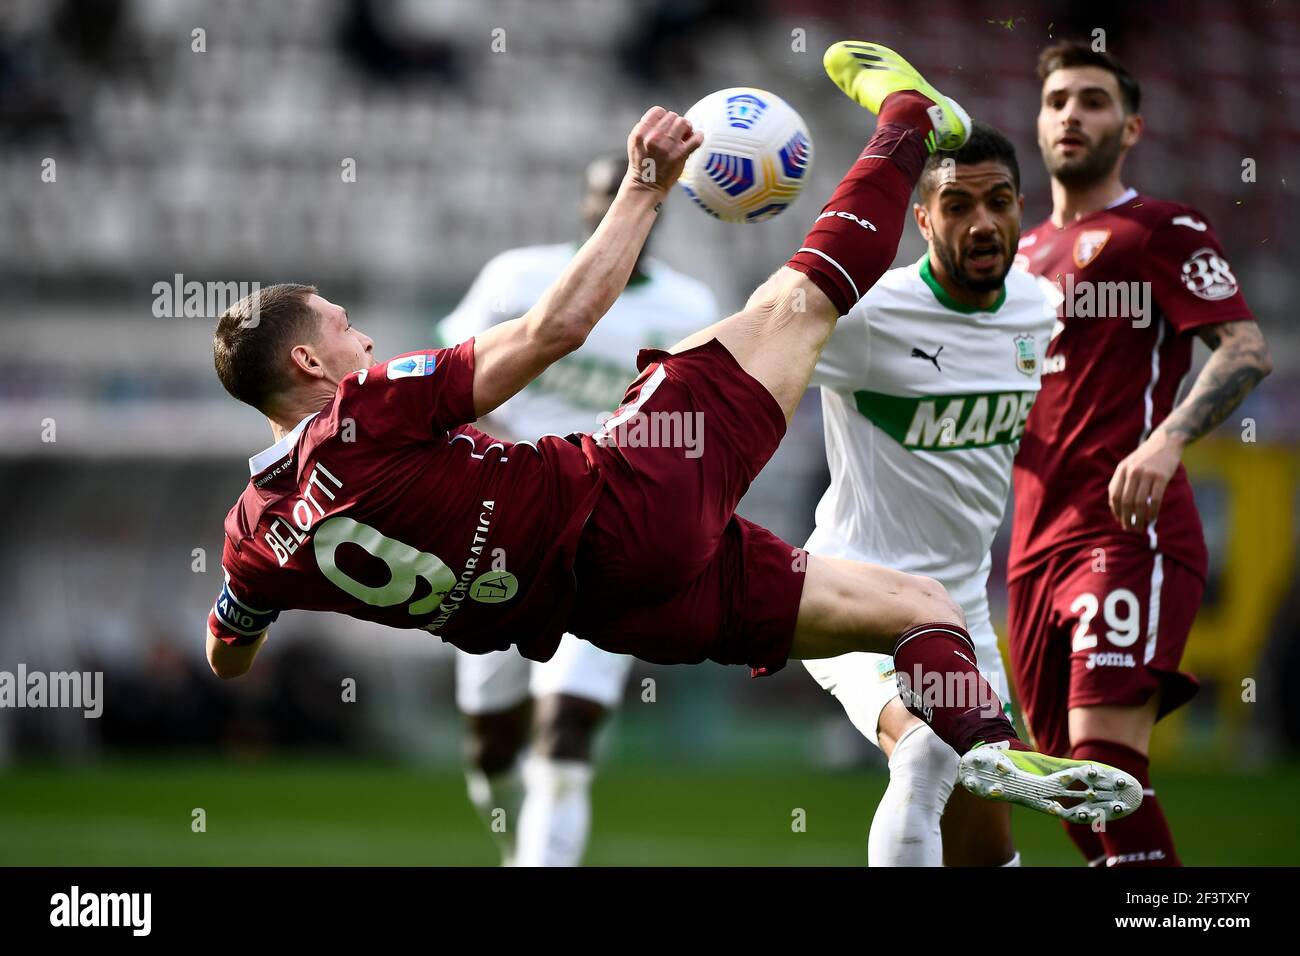 Turin, Italy - 17 March, 2021: Andrea Belotti of Torino FC attempts a bicycle kick during the Serie A football match between Torino FC and US Sassuolo. Torino FC won 3-2 over US Sassuolo. Credit: Nicolò Campo/Alamy Live News Stock Photo